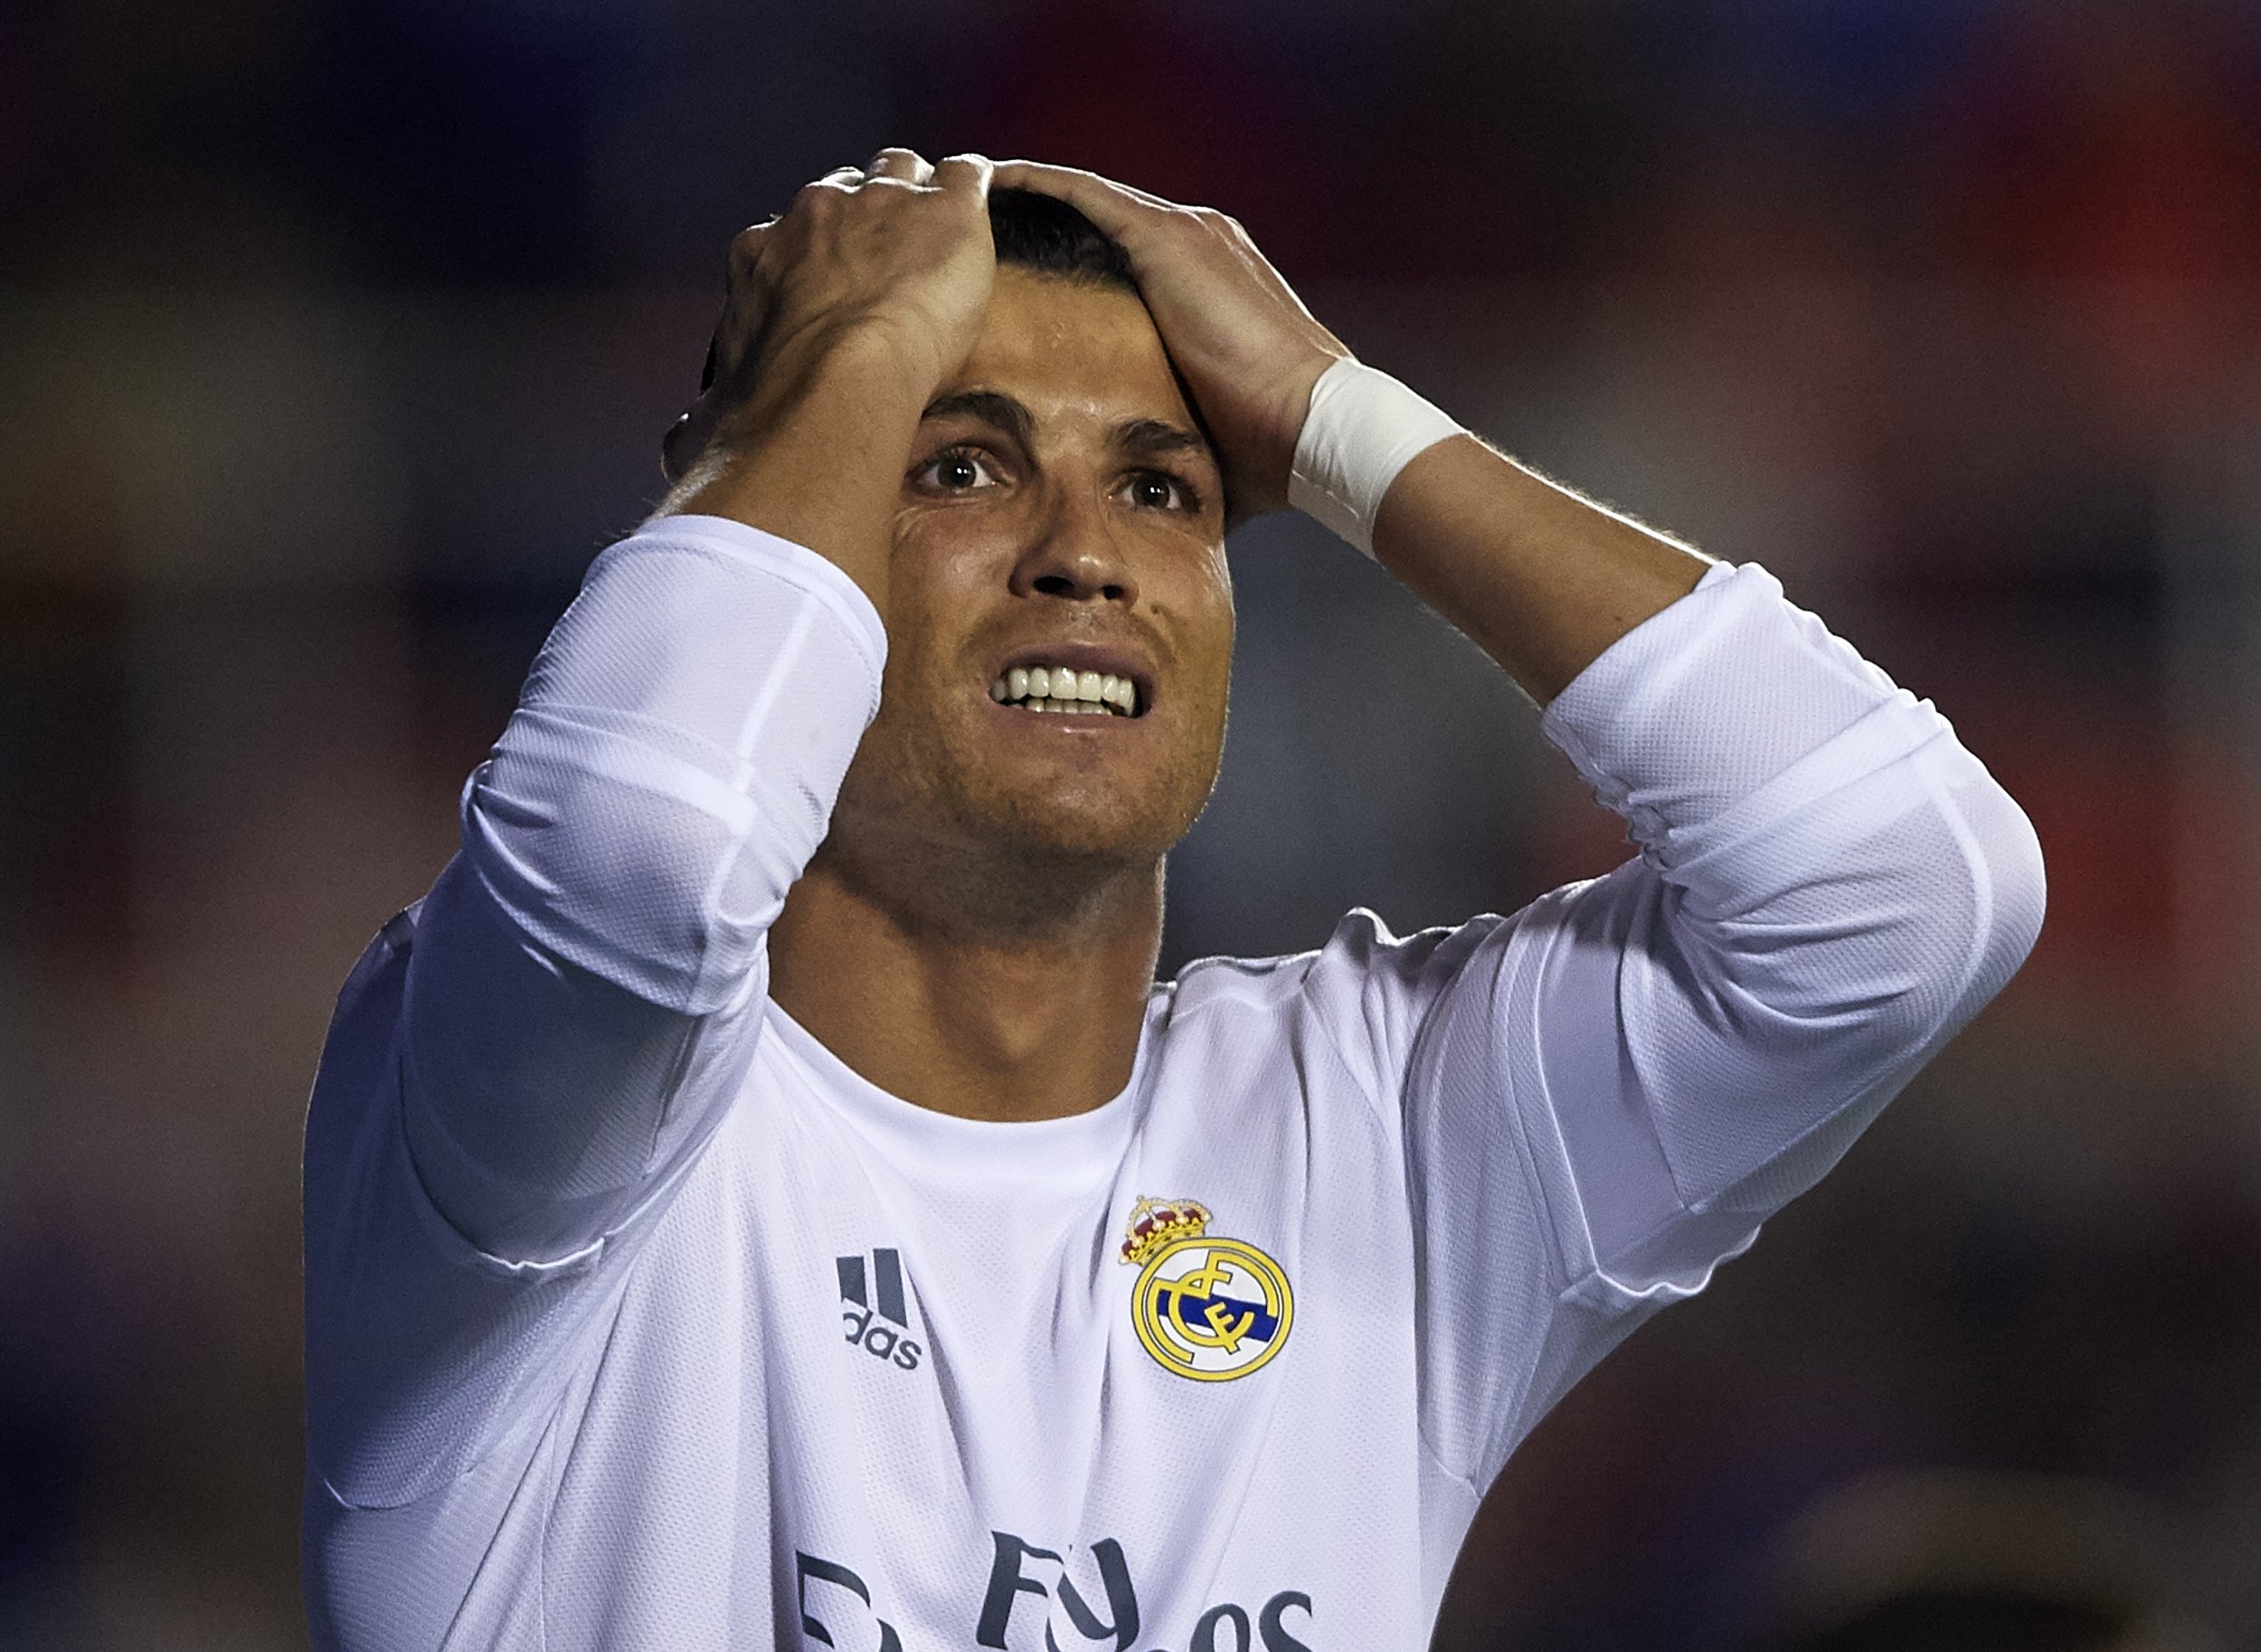 Cristiano Ronaldo is said to be unhappy at Real Madrid.